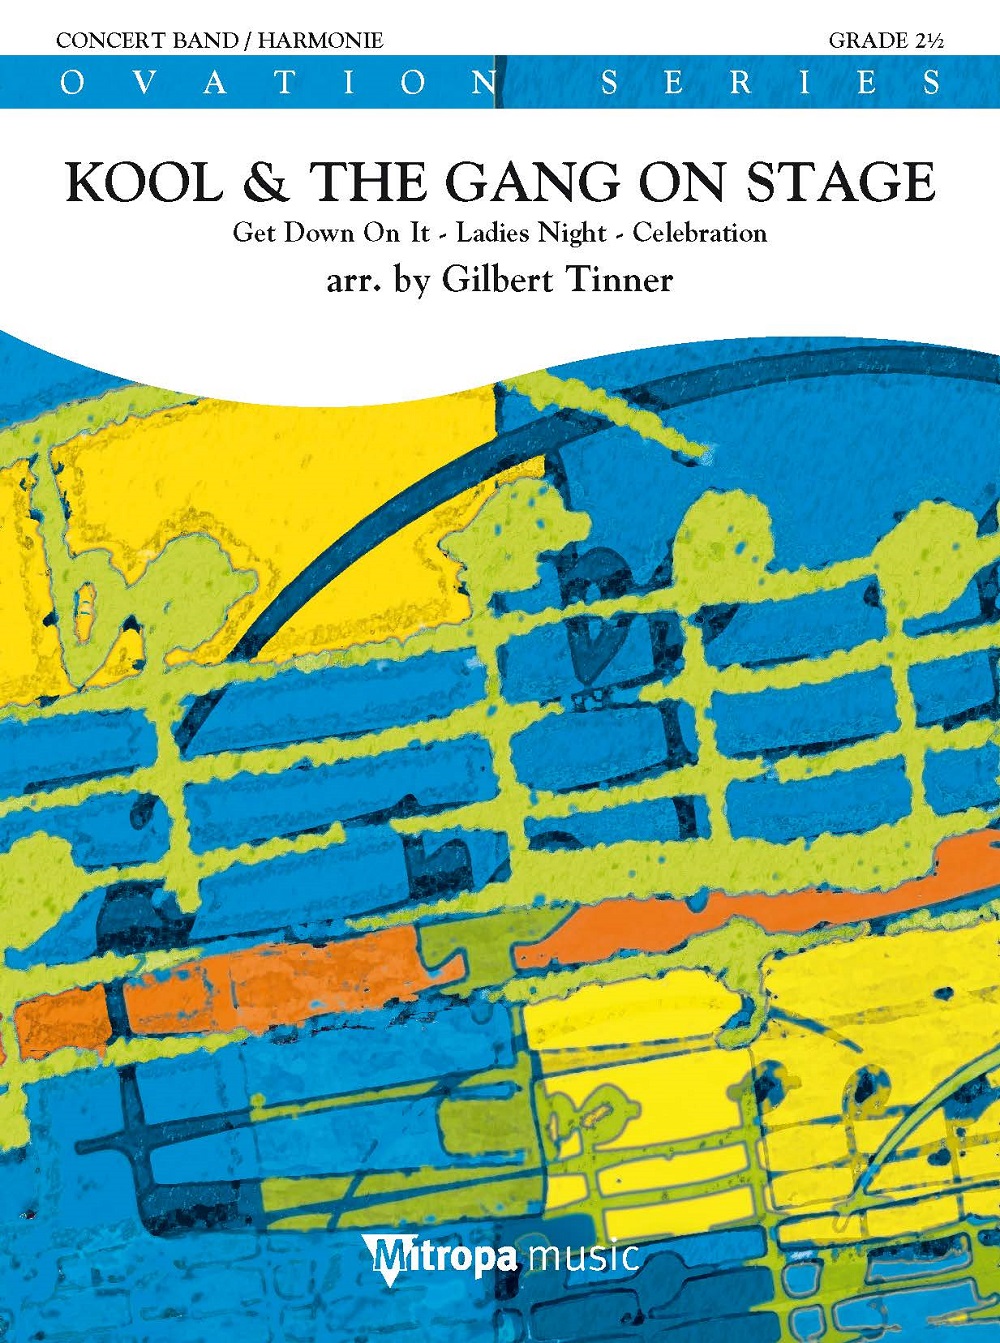 Kool & the Gang on Stage: Concert Band: Score